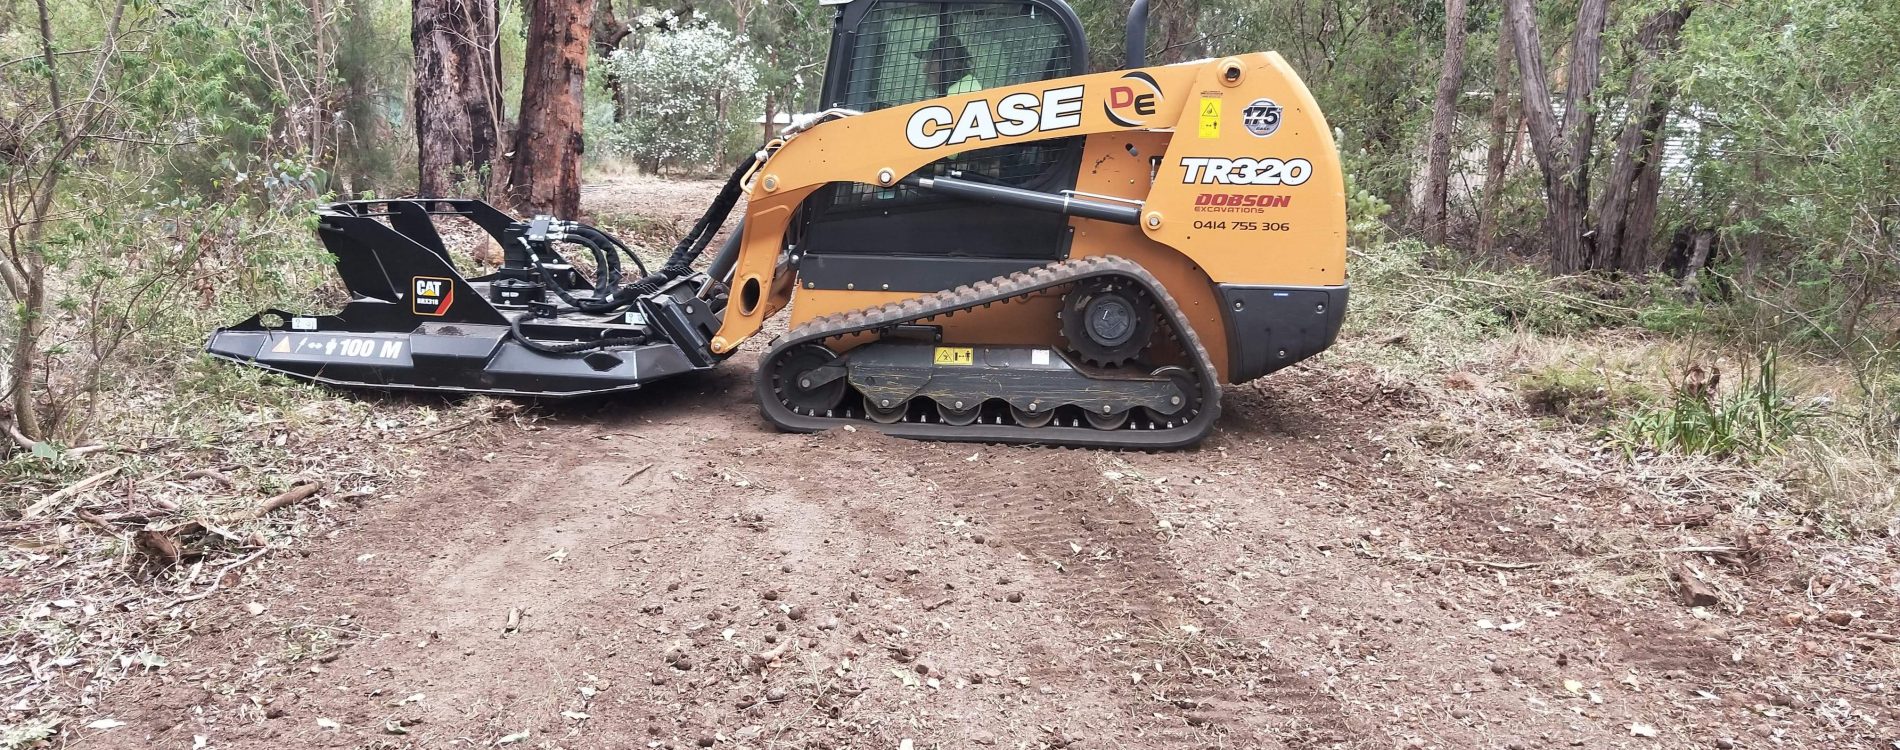 Slasher-Brush Cutter Hire with Bobcat